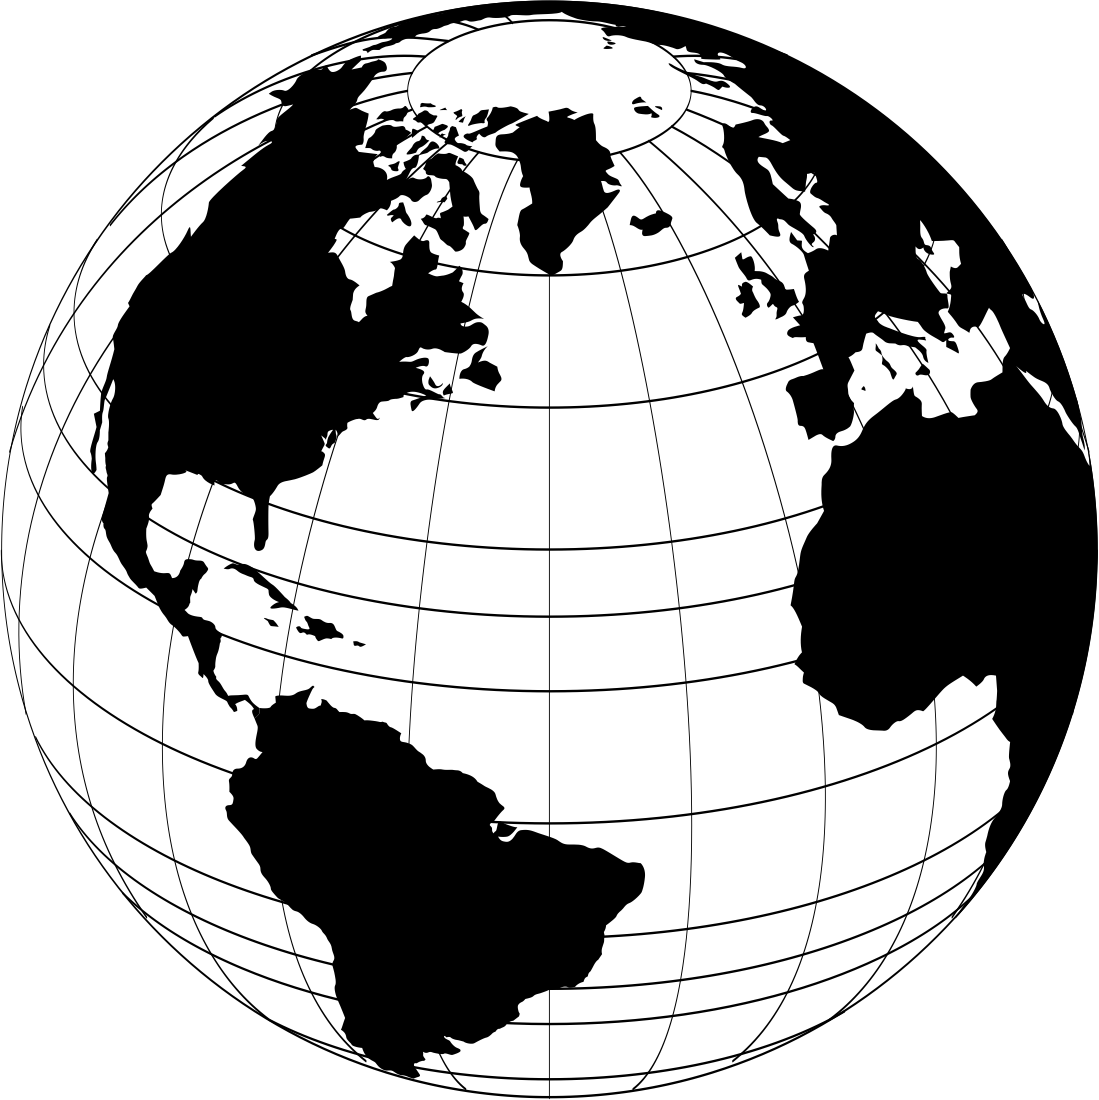 World Globe Vector Free Vector cdr Download - 3axis.co